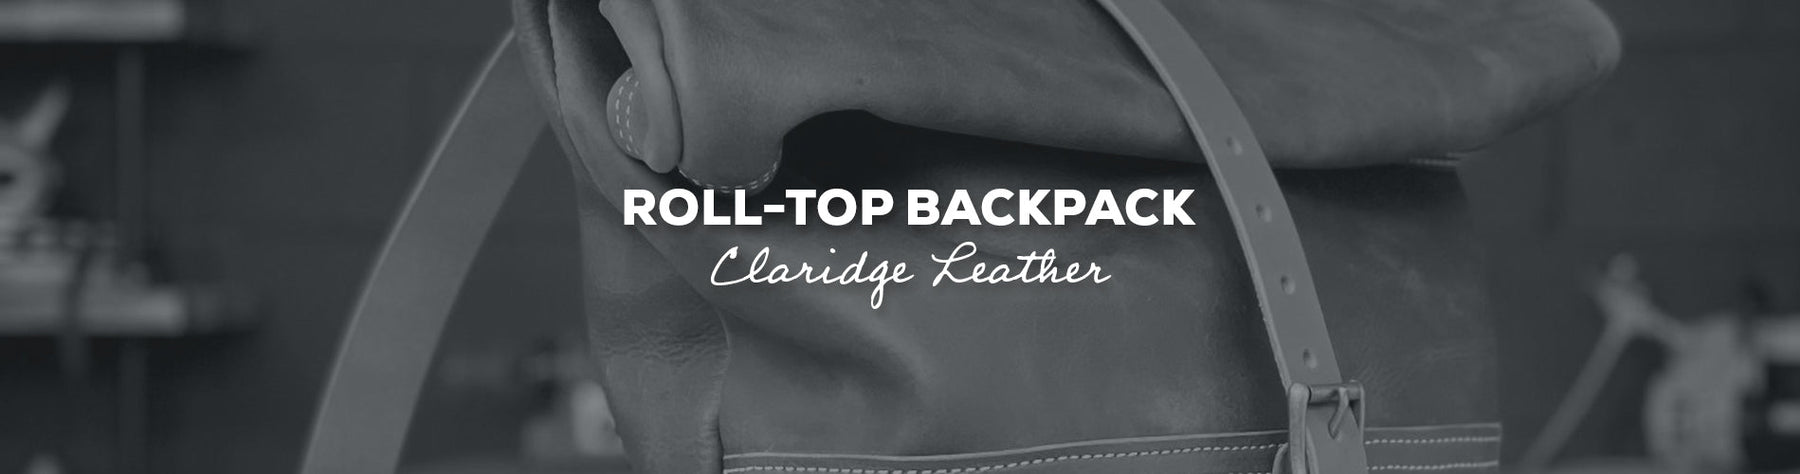 Gift Idea: Roll-Top Backpack with Claridge Leather